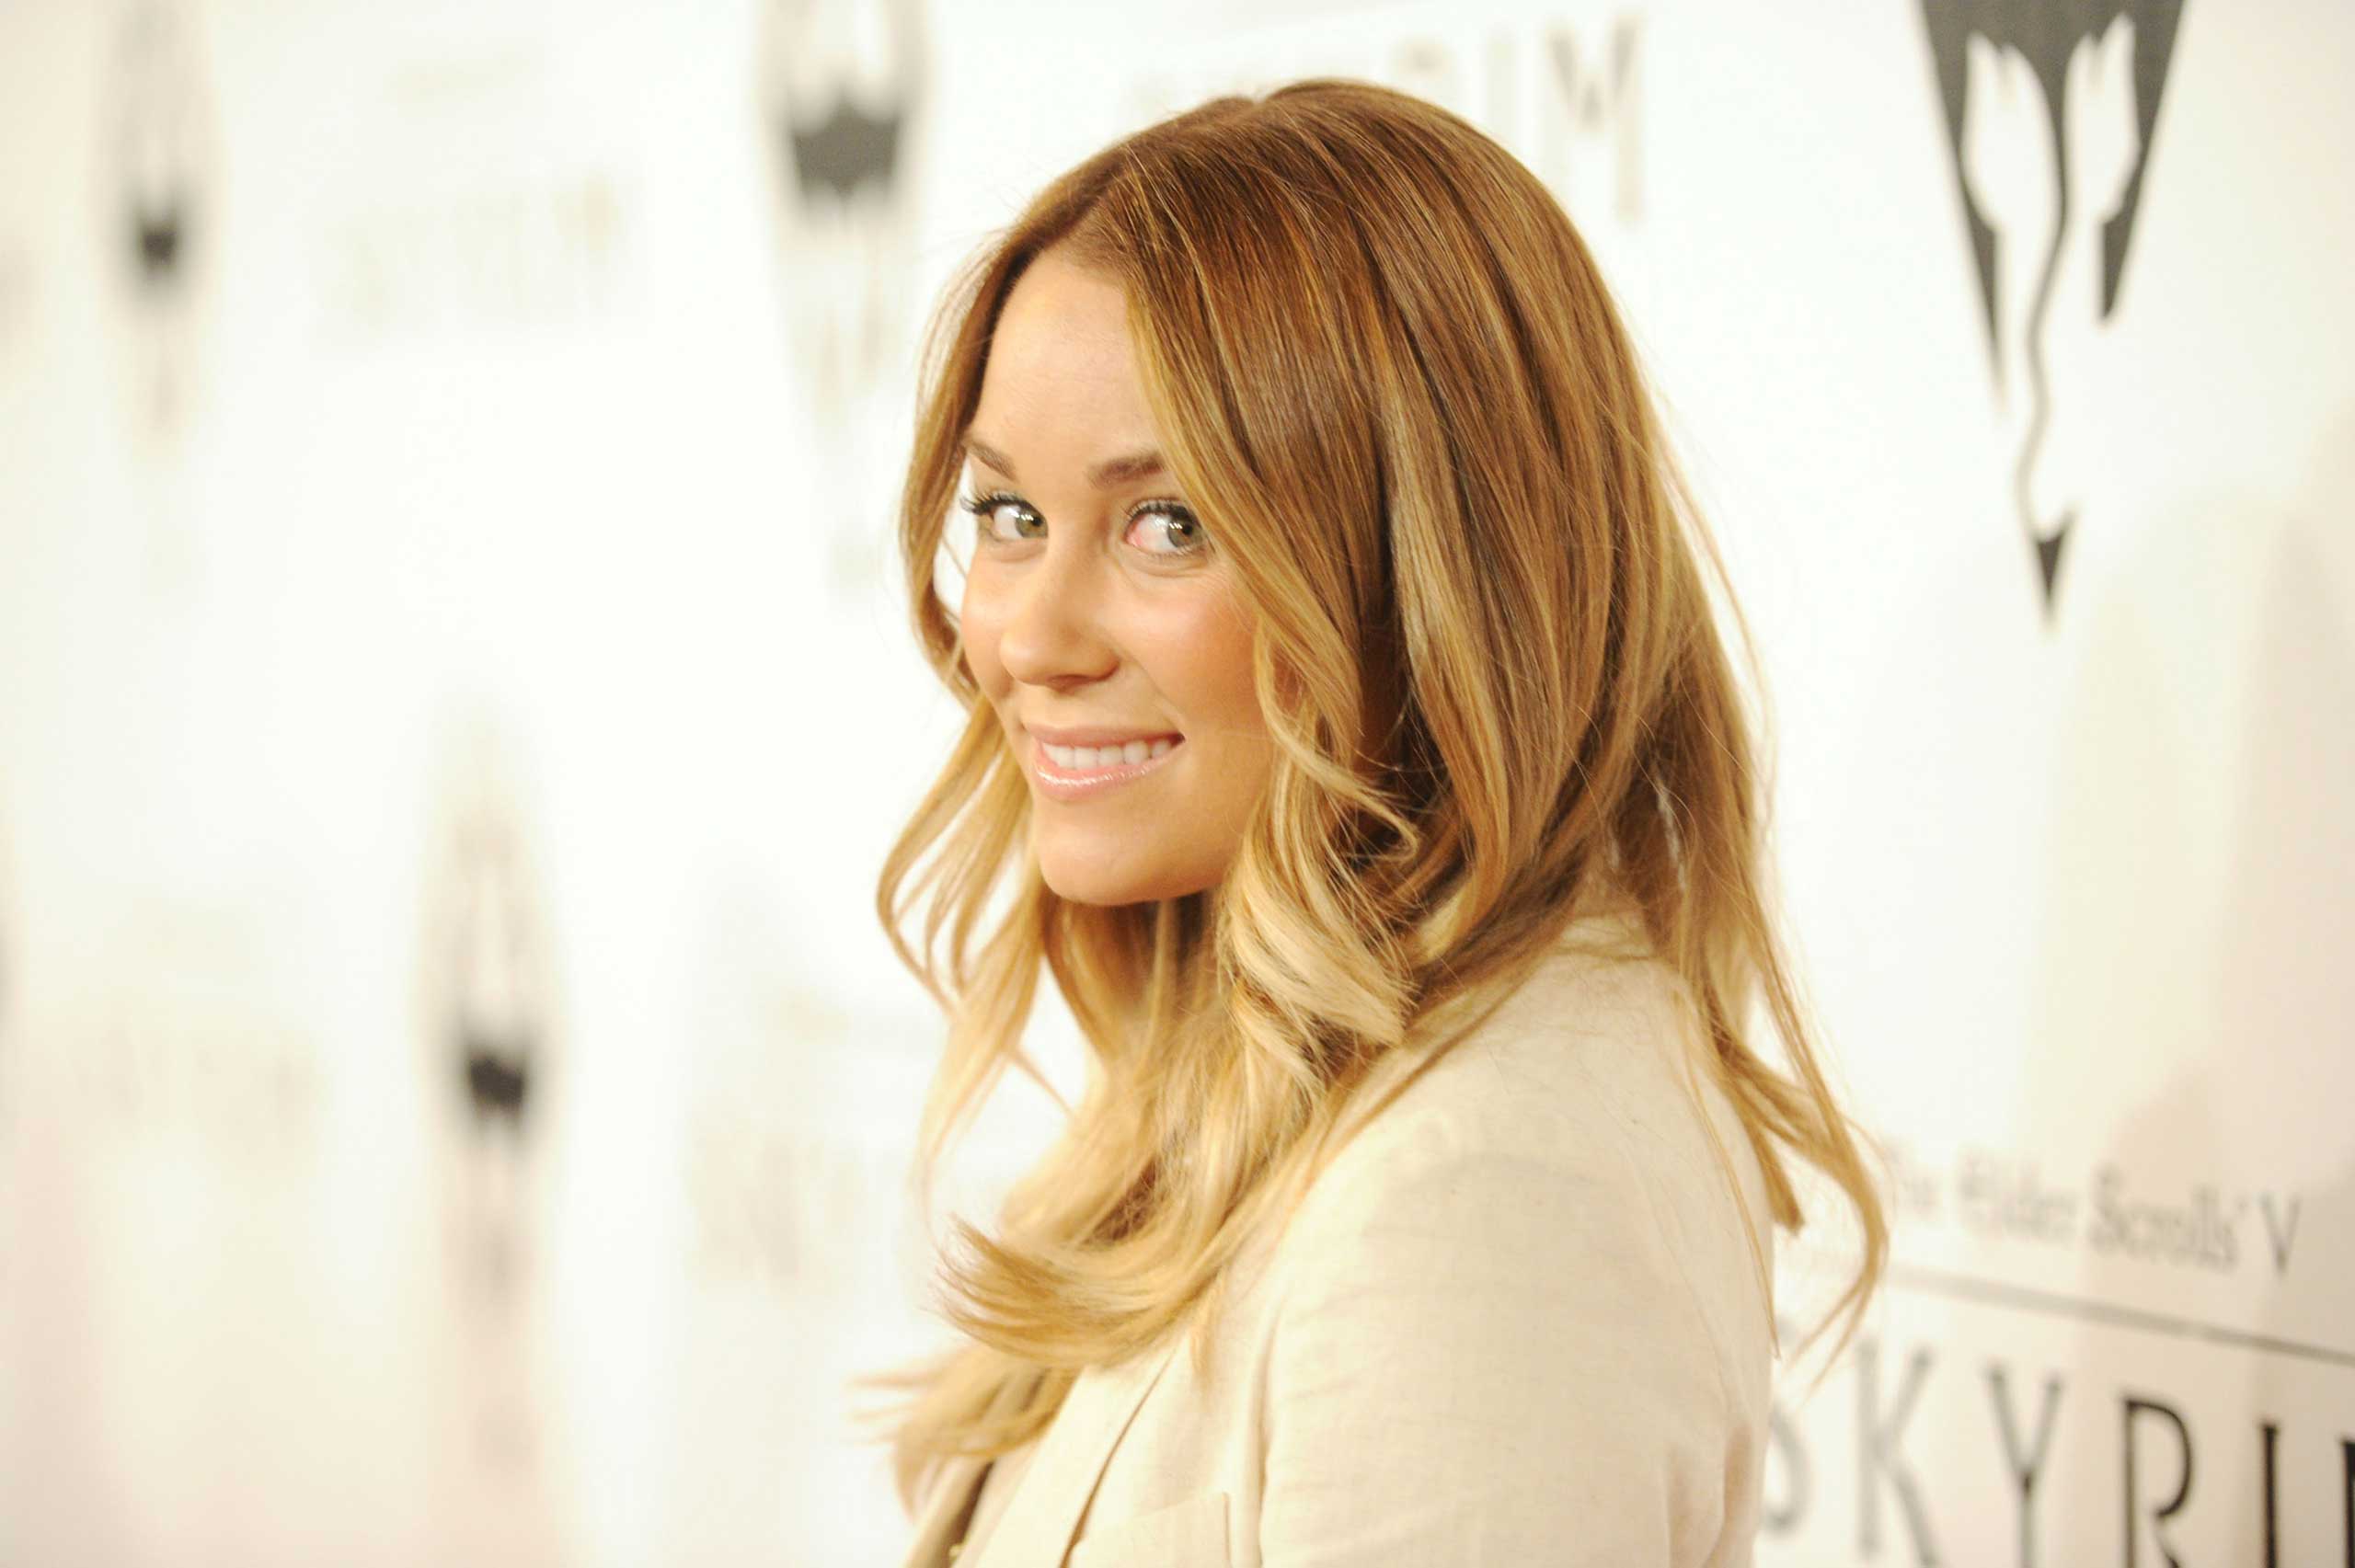 Former reality TV star Lauren Conrad offers everything from fitness to crafts on her lifestyle blog, Laurenconrad.com.